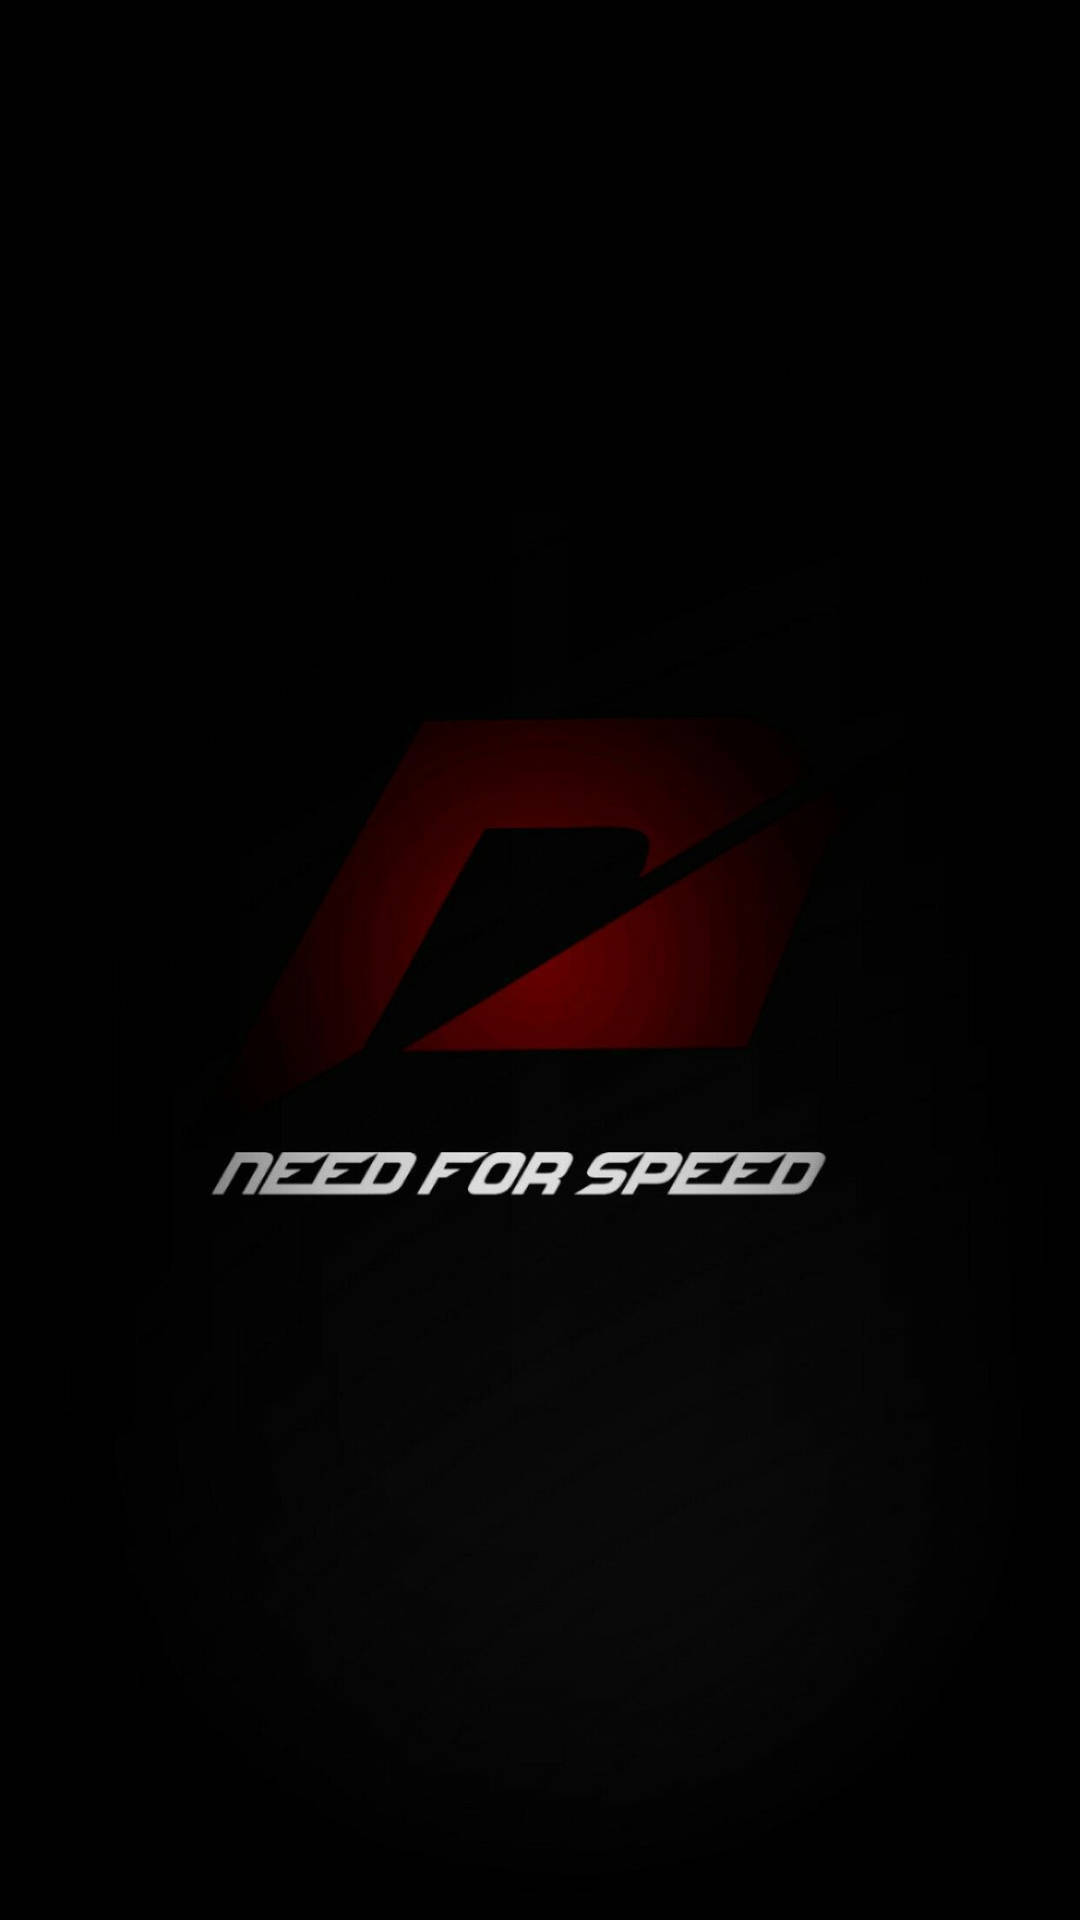 Need For Speed Iphone Wallpaper